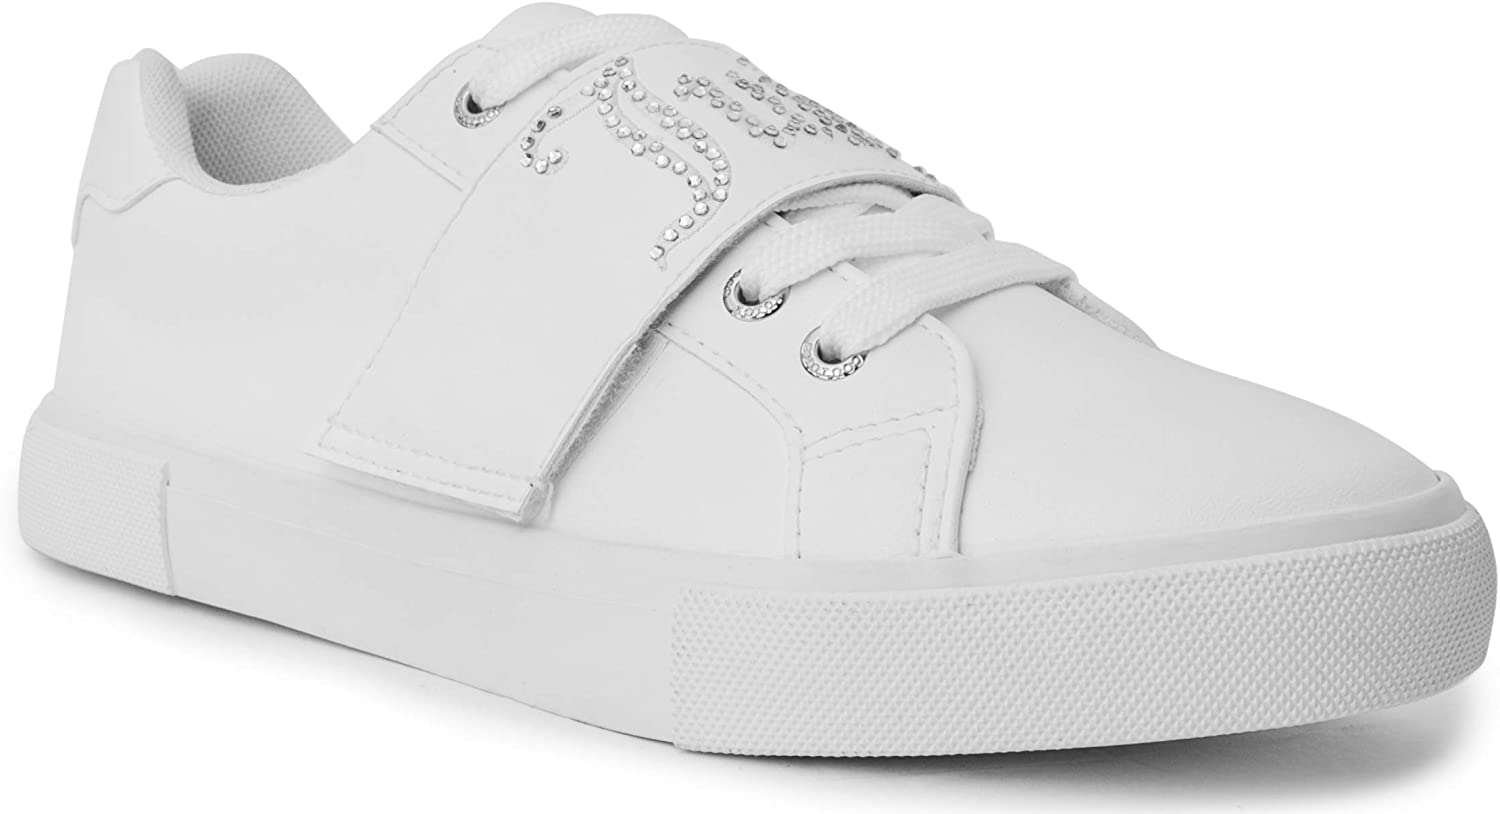 Juicy Couture Women Fashion Sneaker Womens Casual Shoes Platform Tennis Shoes All White, Chunky Sneakers, Walking Shoes - image 1 of 7